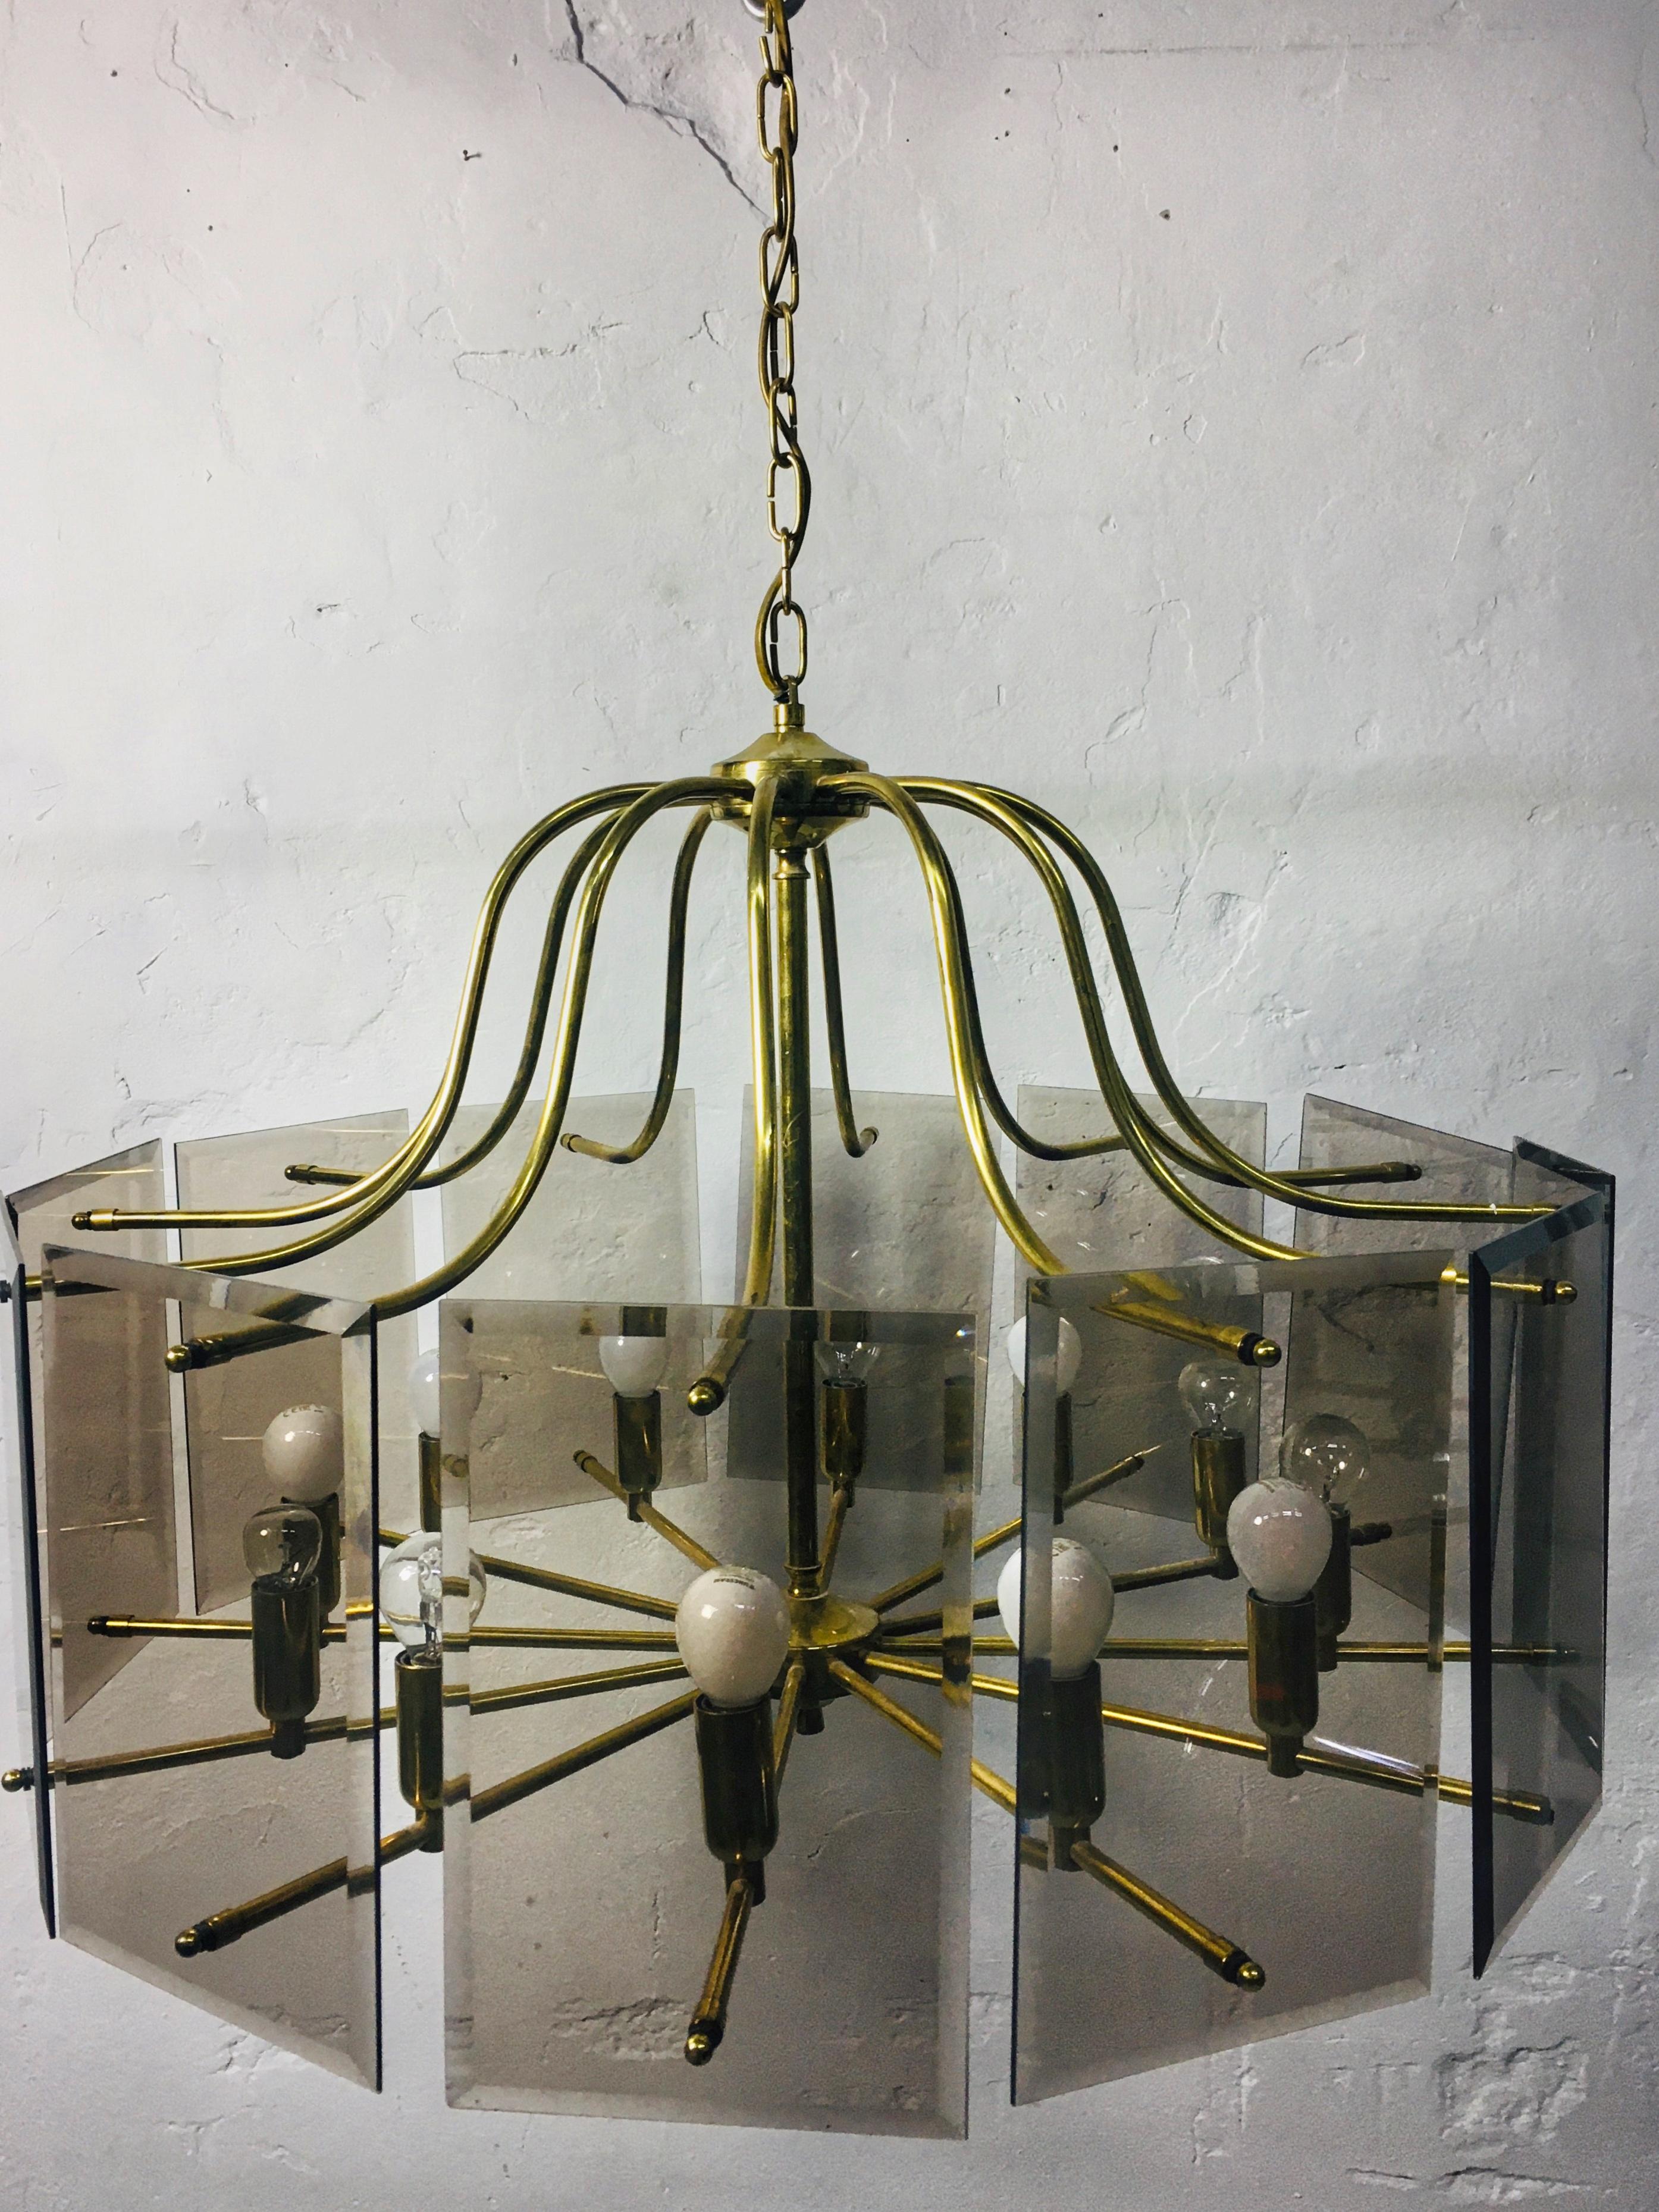 Gold-colored, 12-burner copper chandelier with smoked glass panels with polished edges. Elegant, clean design that provides a pleasant diffused light. 1970s. A rare form.